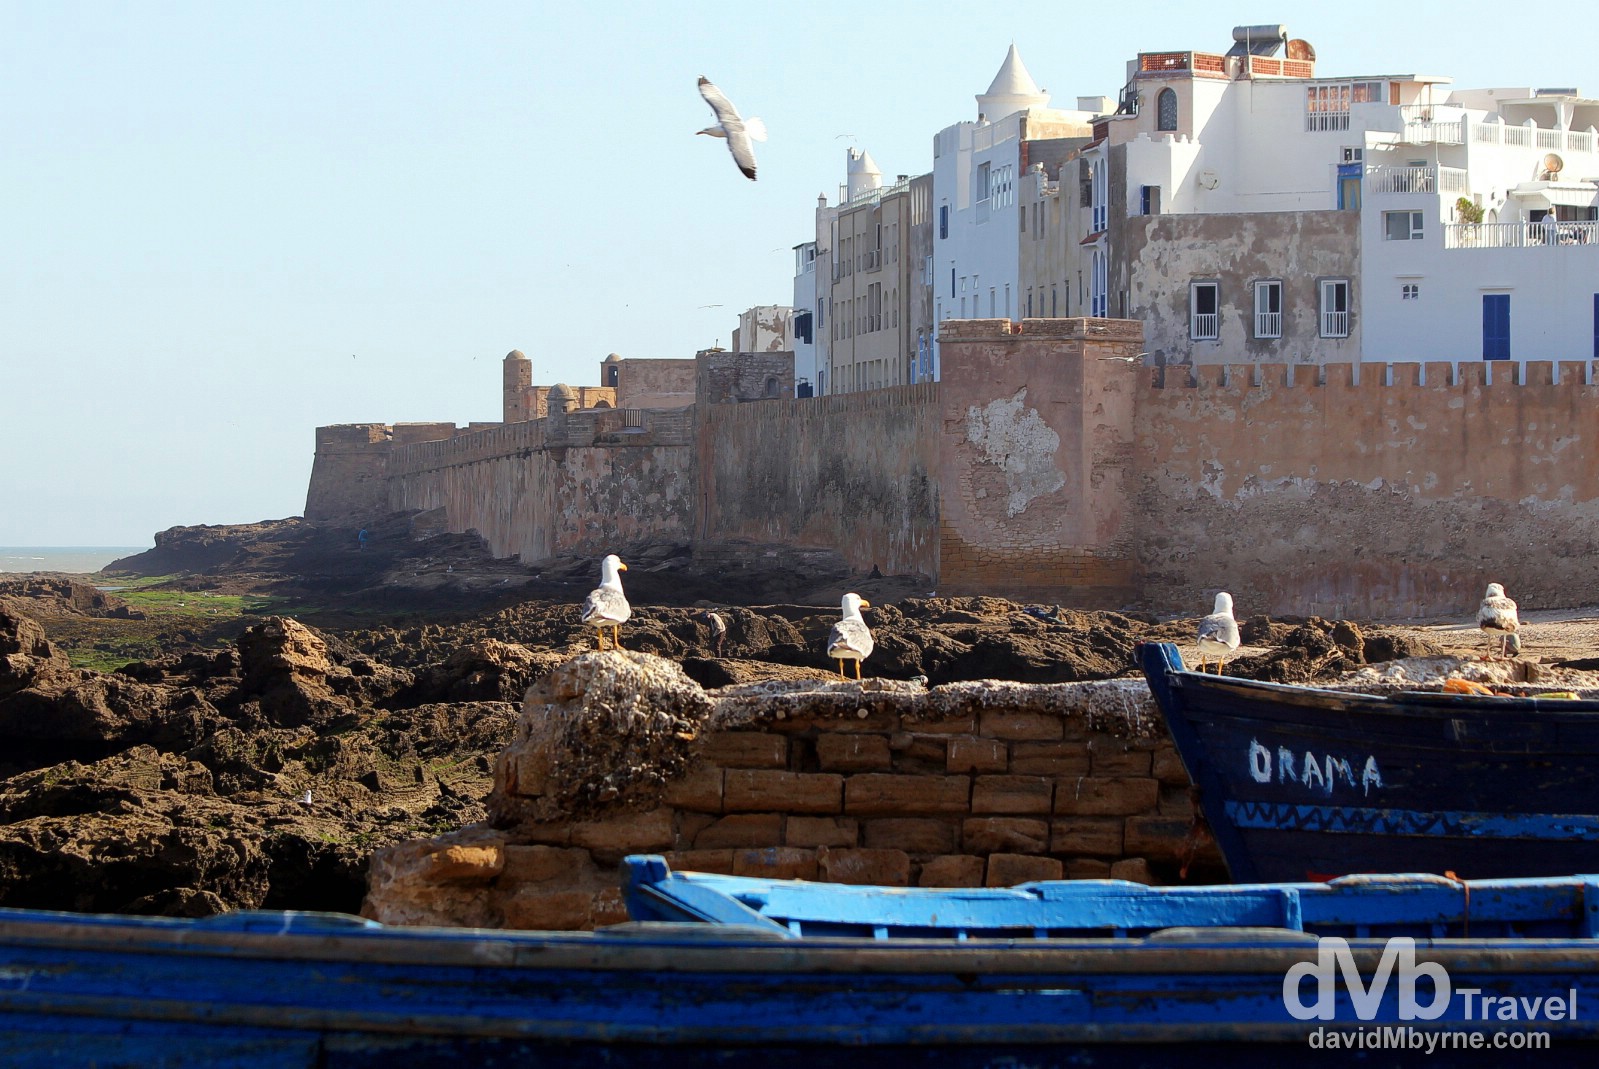 The Atlantic-fronting walls of the medina as seen from the port in Essaouira, Morocco. May 3rd, 2014.